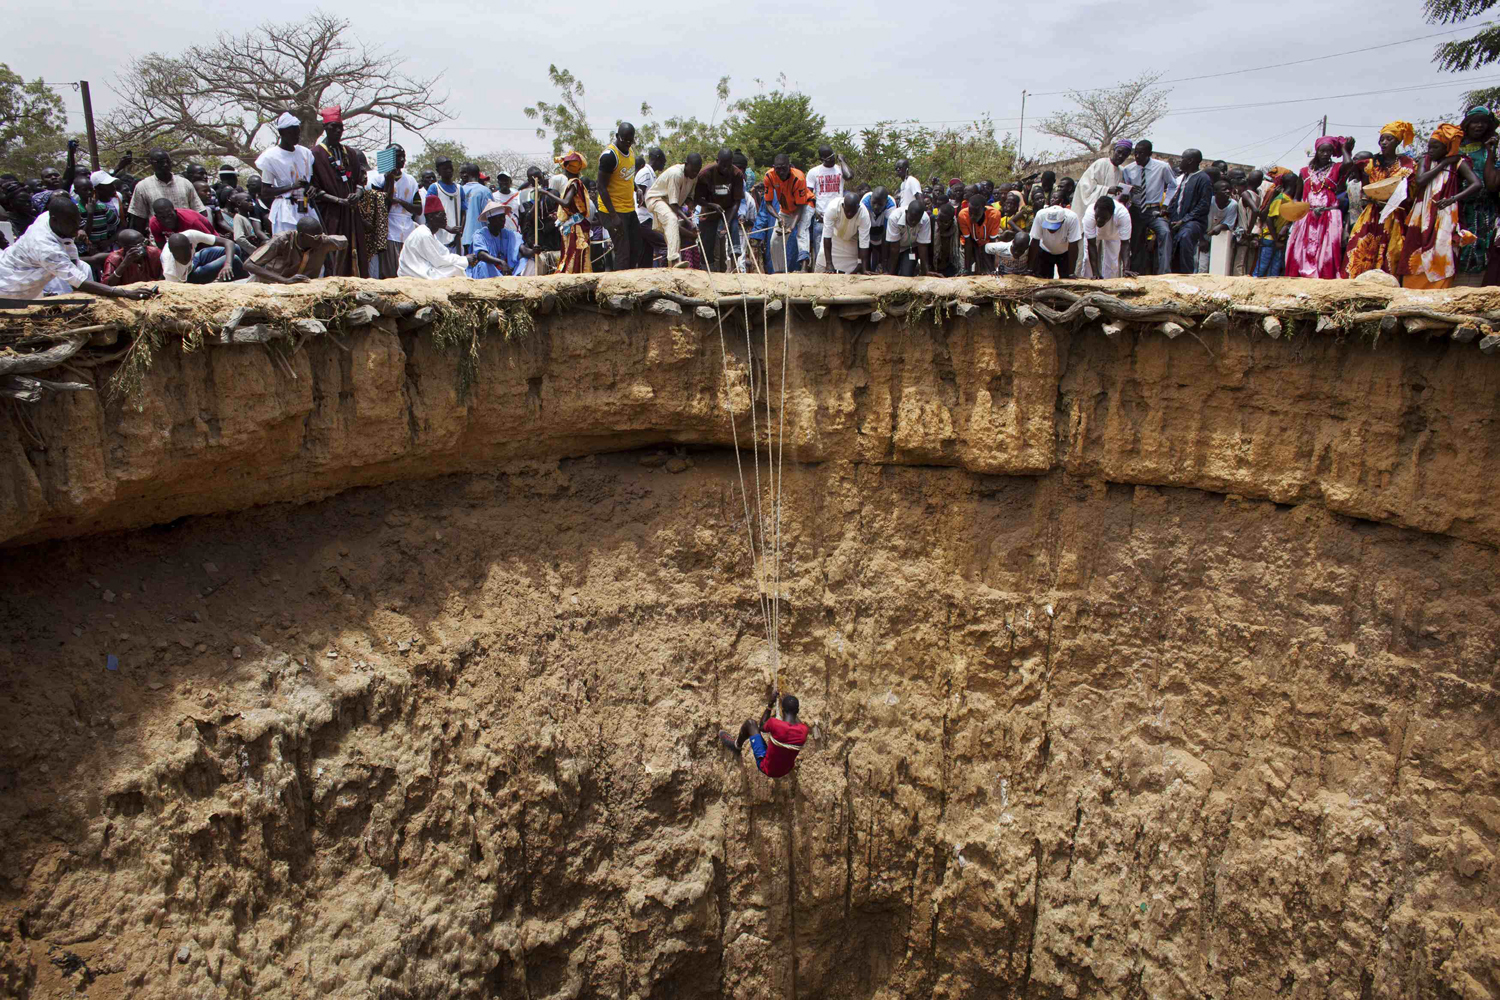 People watch a man descend into a large former well during a traditional ceremony in the village of Ndande